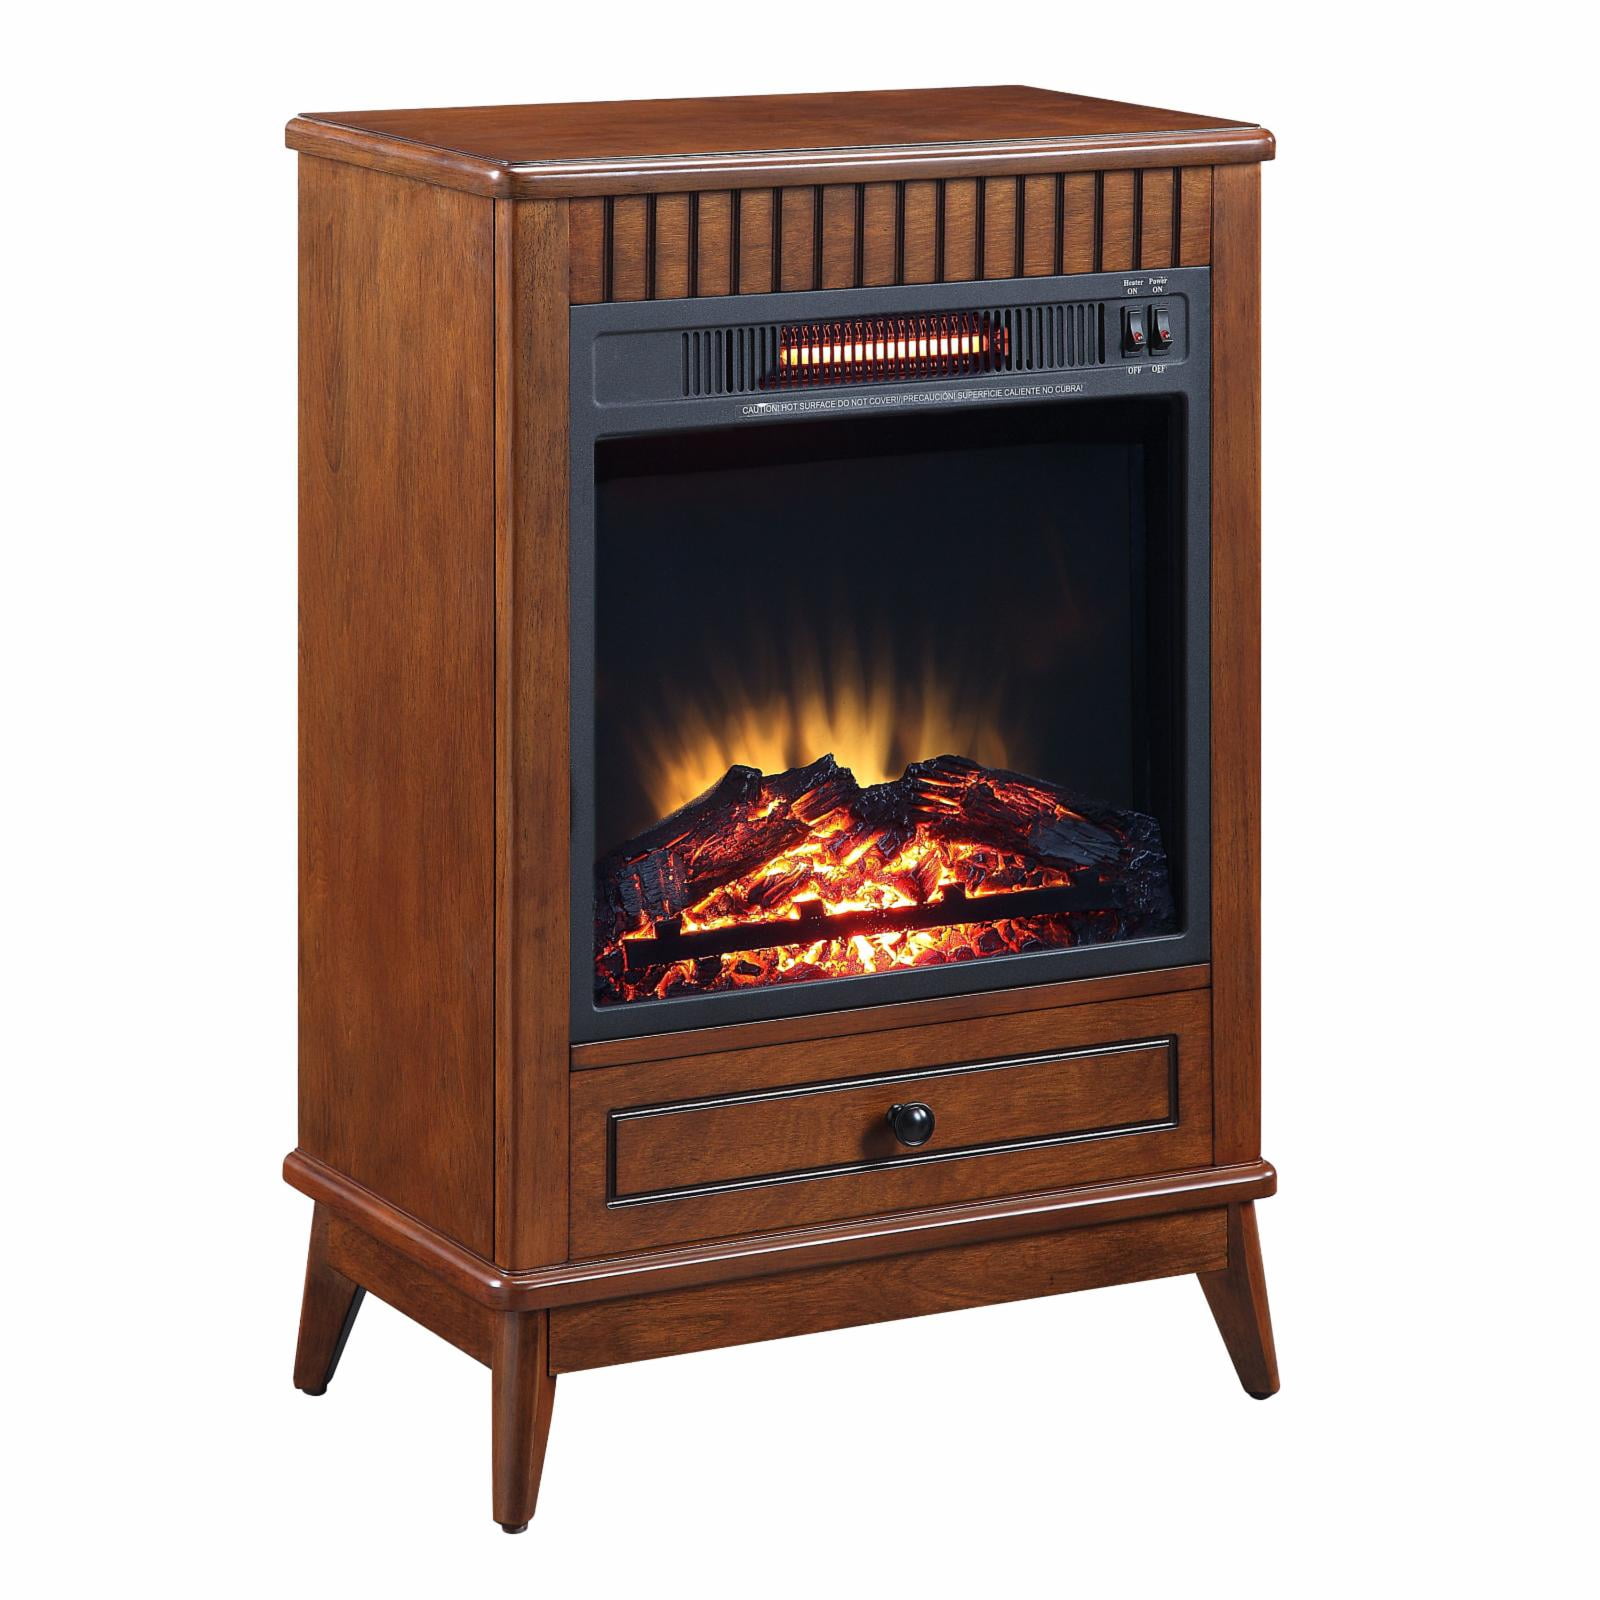 Picture of Acme Furniture AC00852 22 x 13 x 32 in. Hamish Fireplace, Walnut